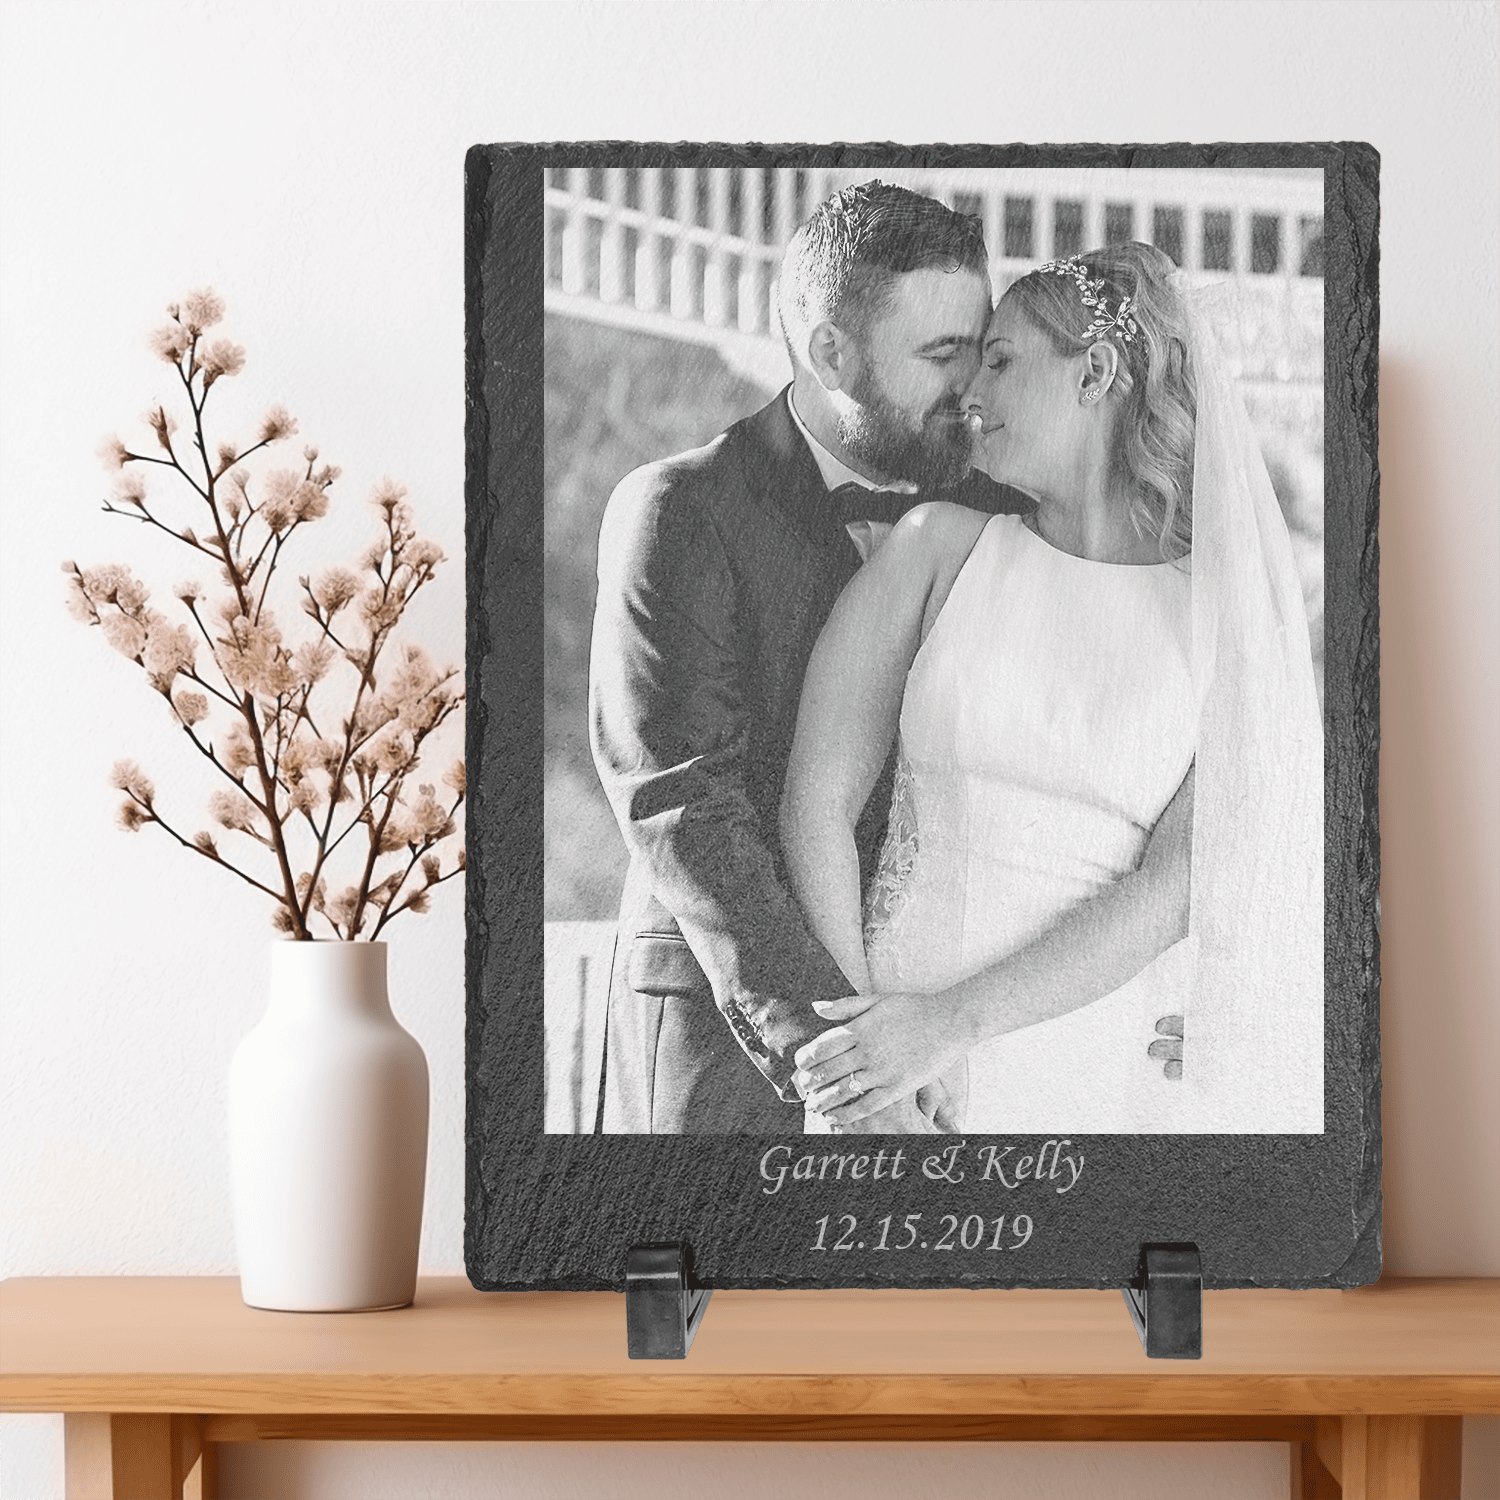 Together Forever Photo Plaque